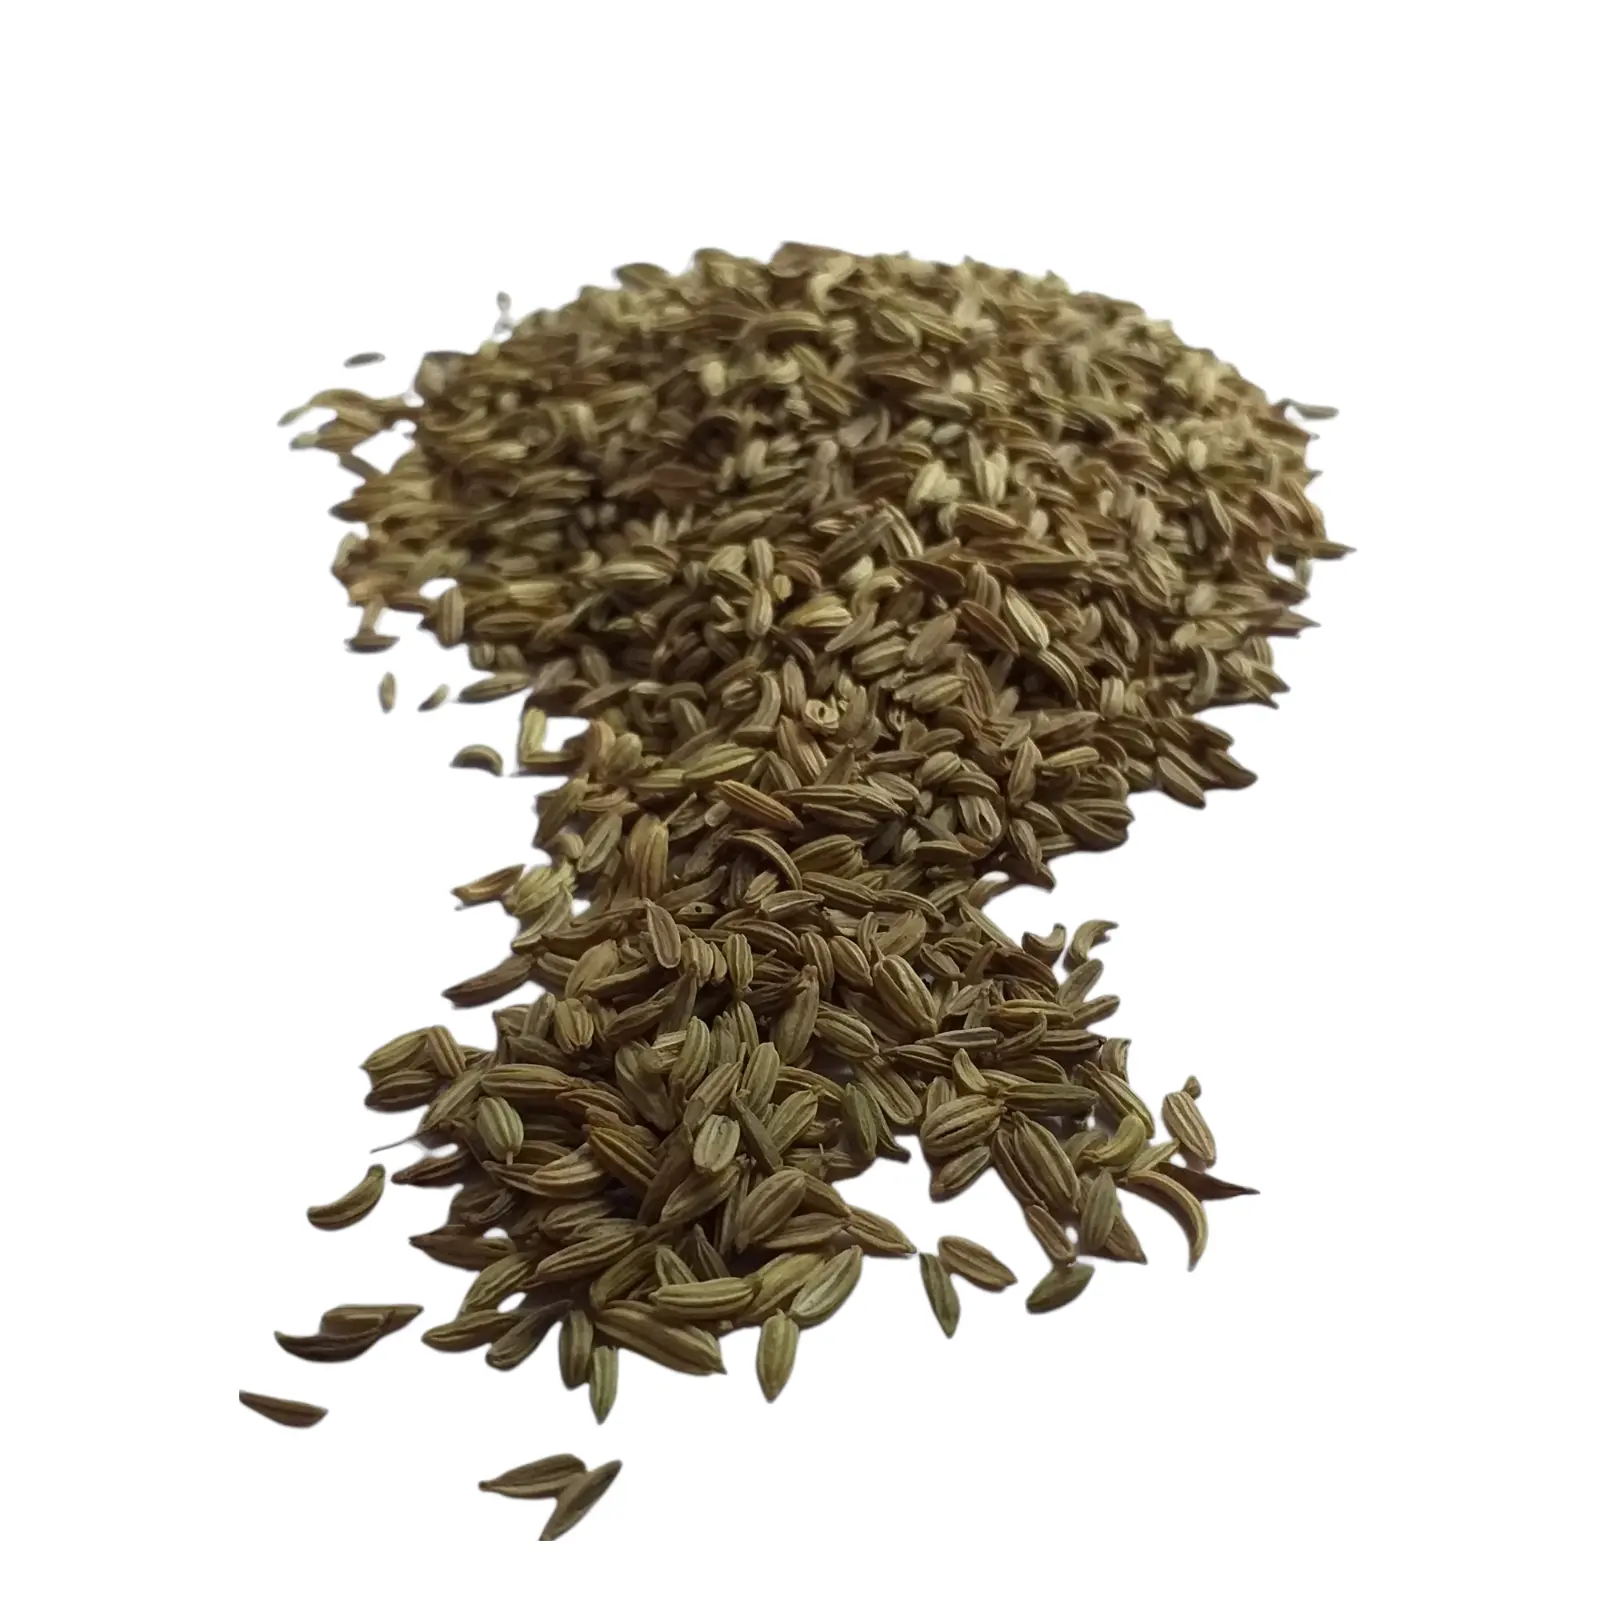 100% Pure Dried Fennel Seed Extract Powder Naturally Processed Greenish Colour Fennel Seeds Extract Powder For Cooking